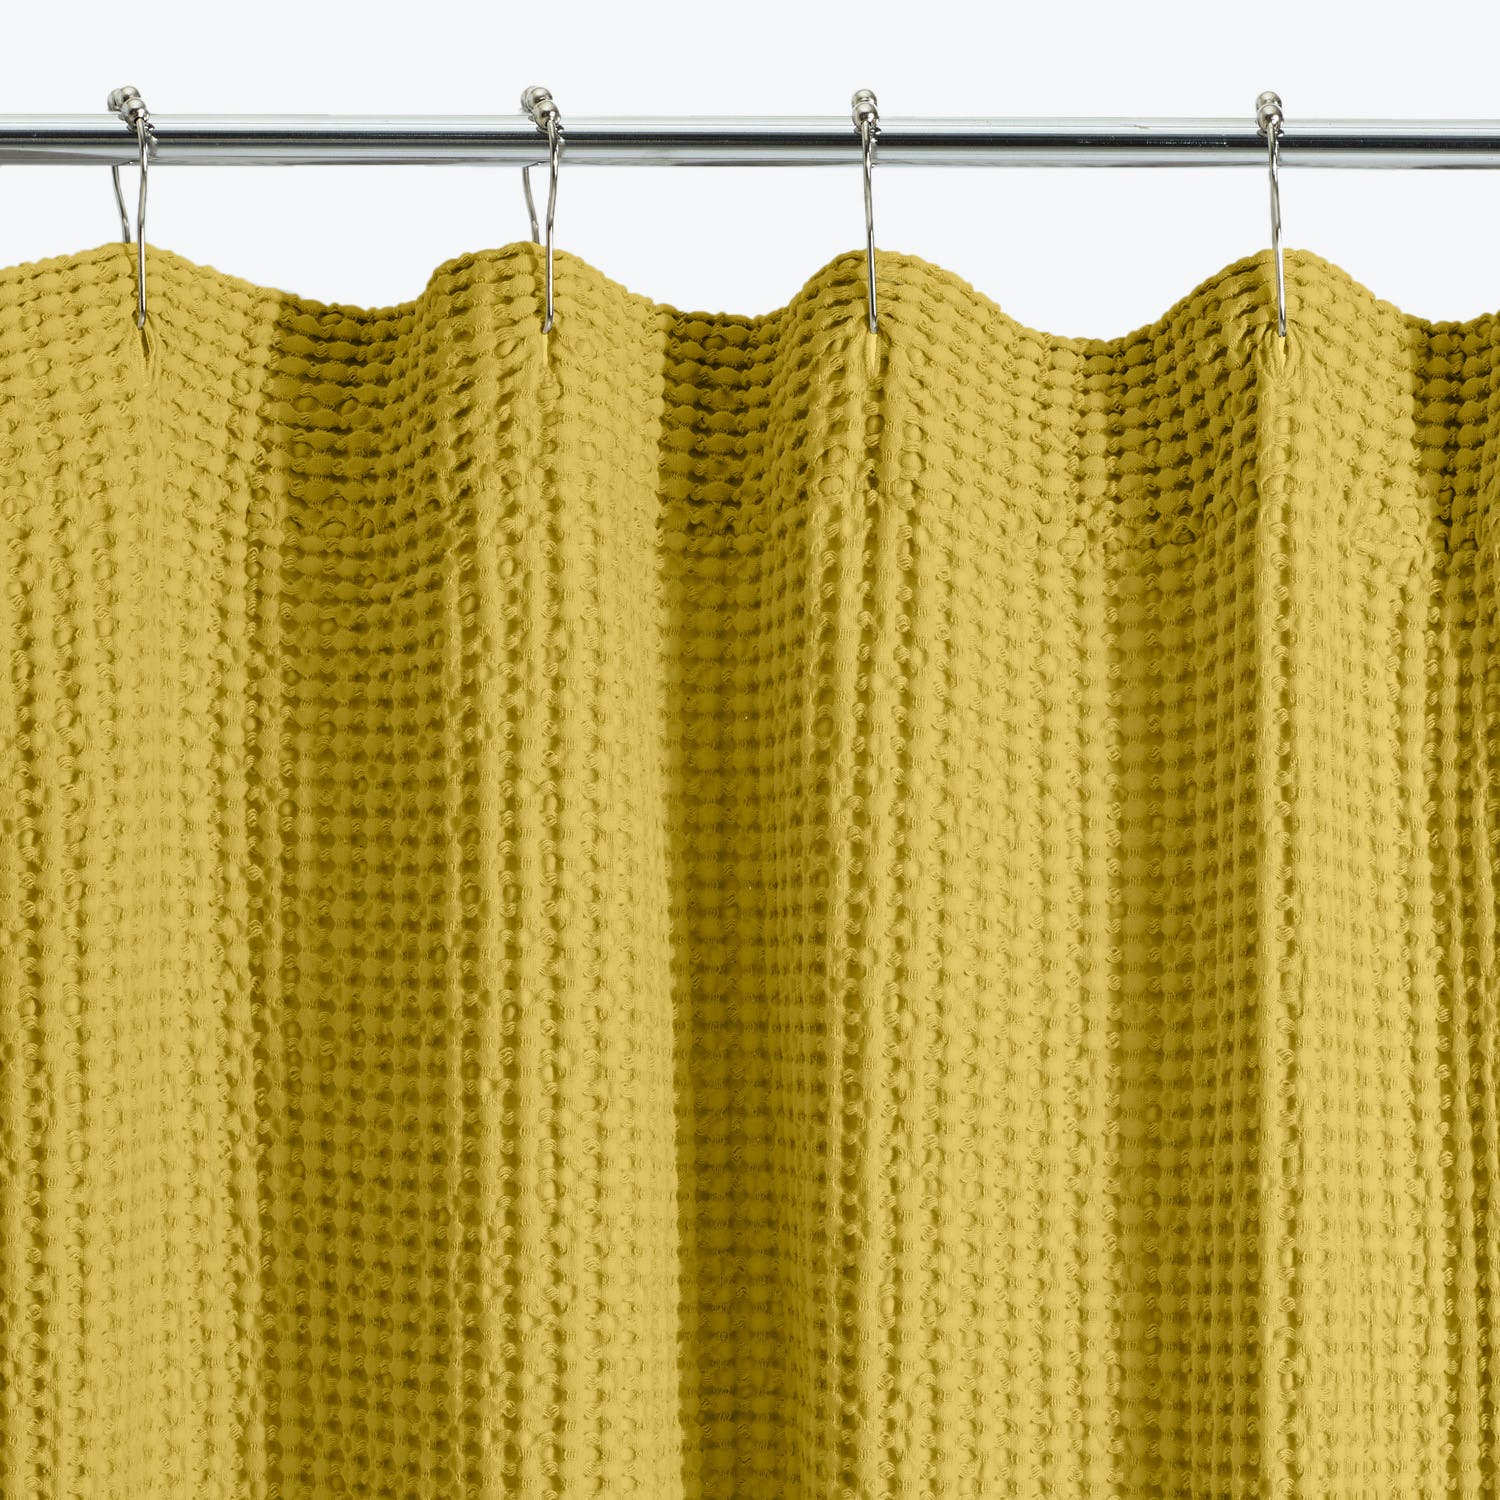 Yellow textured curtain with knitted-like pattern hangs on metal rod.